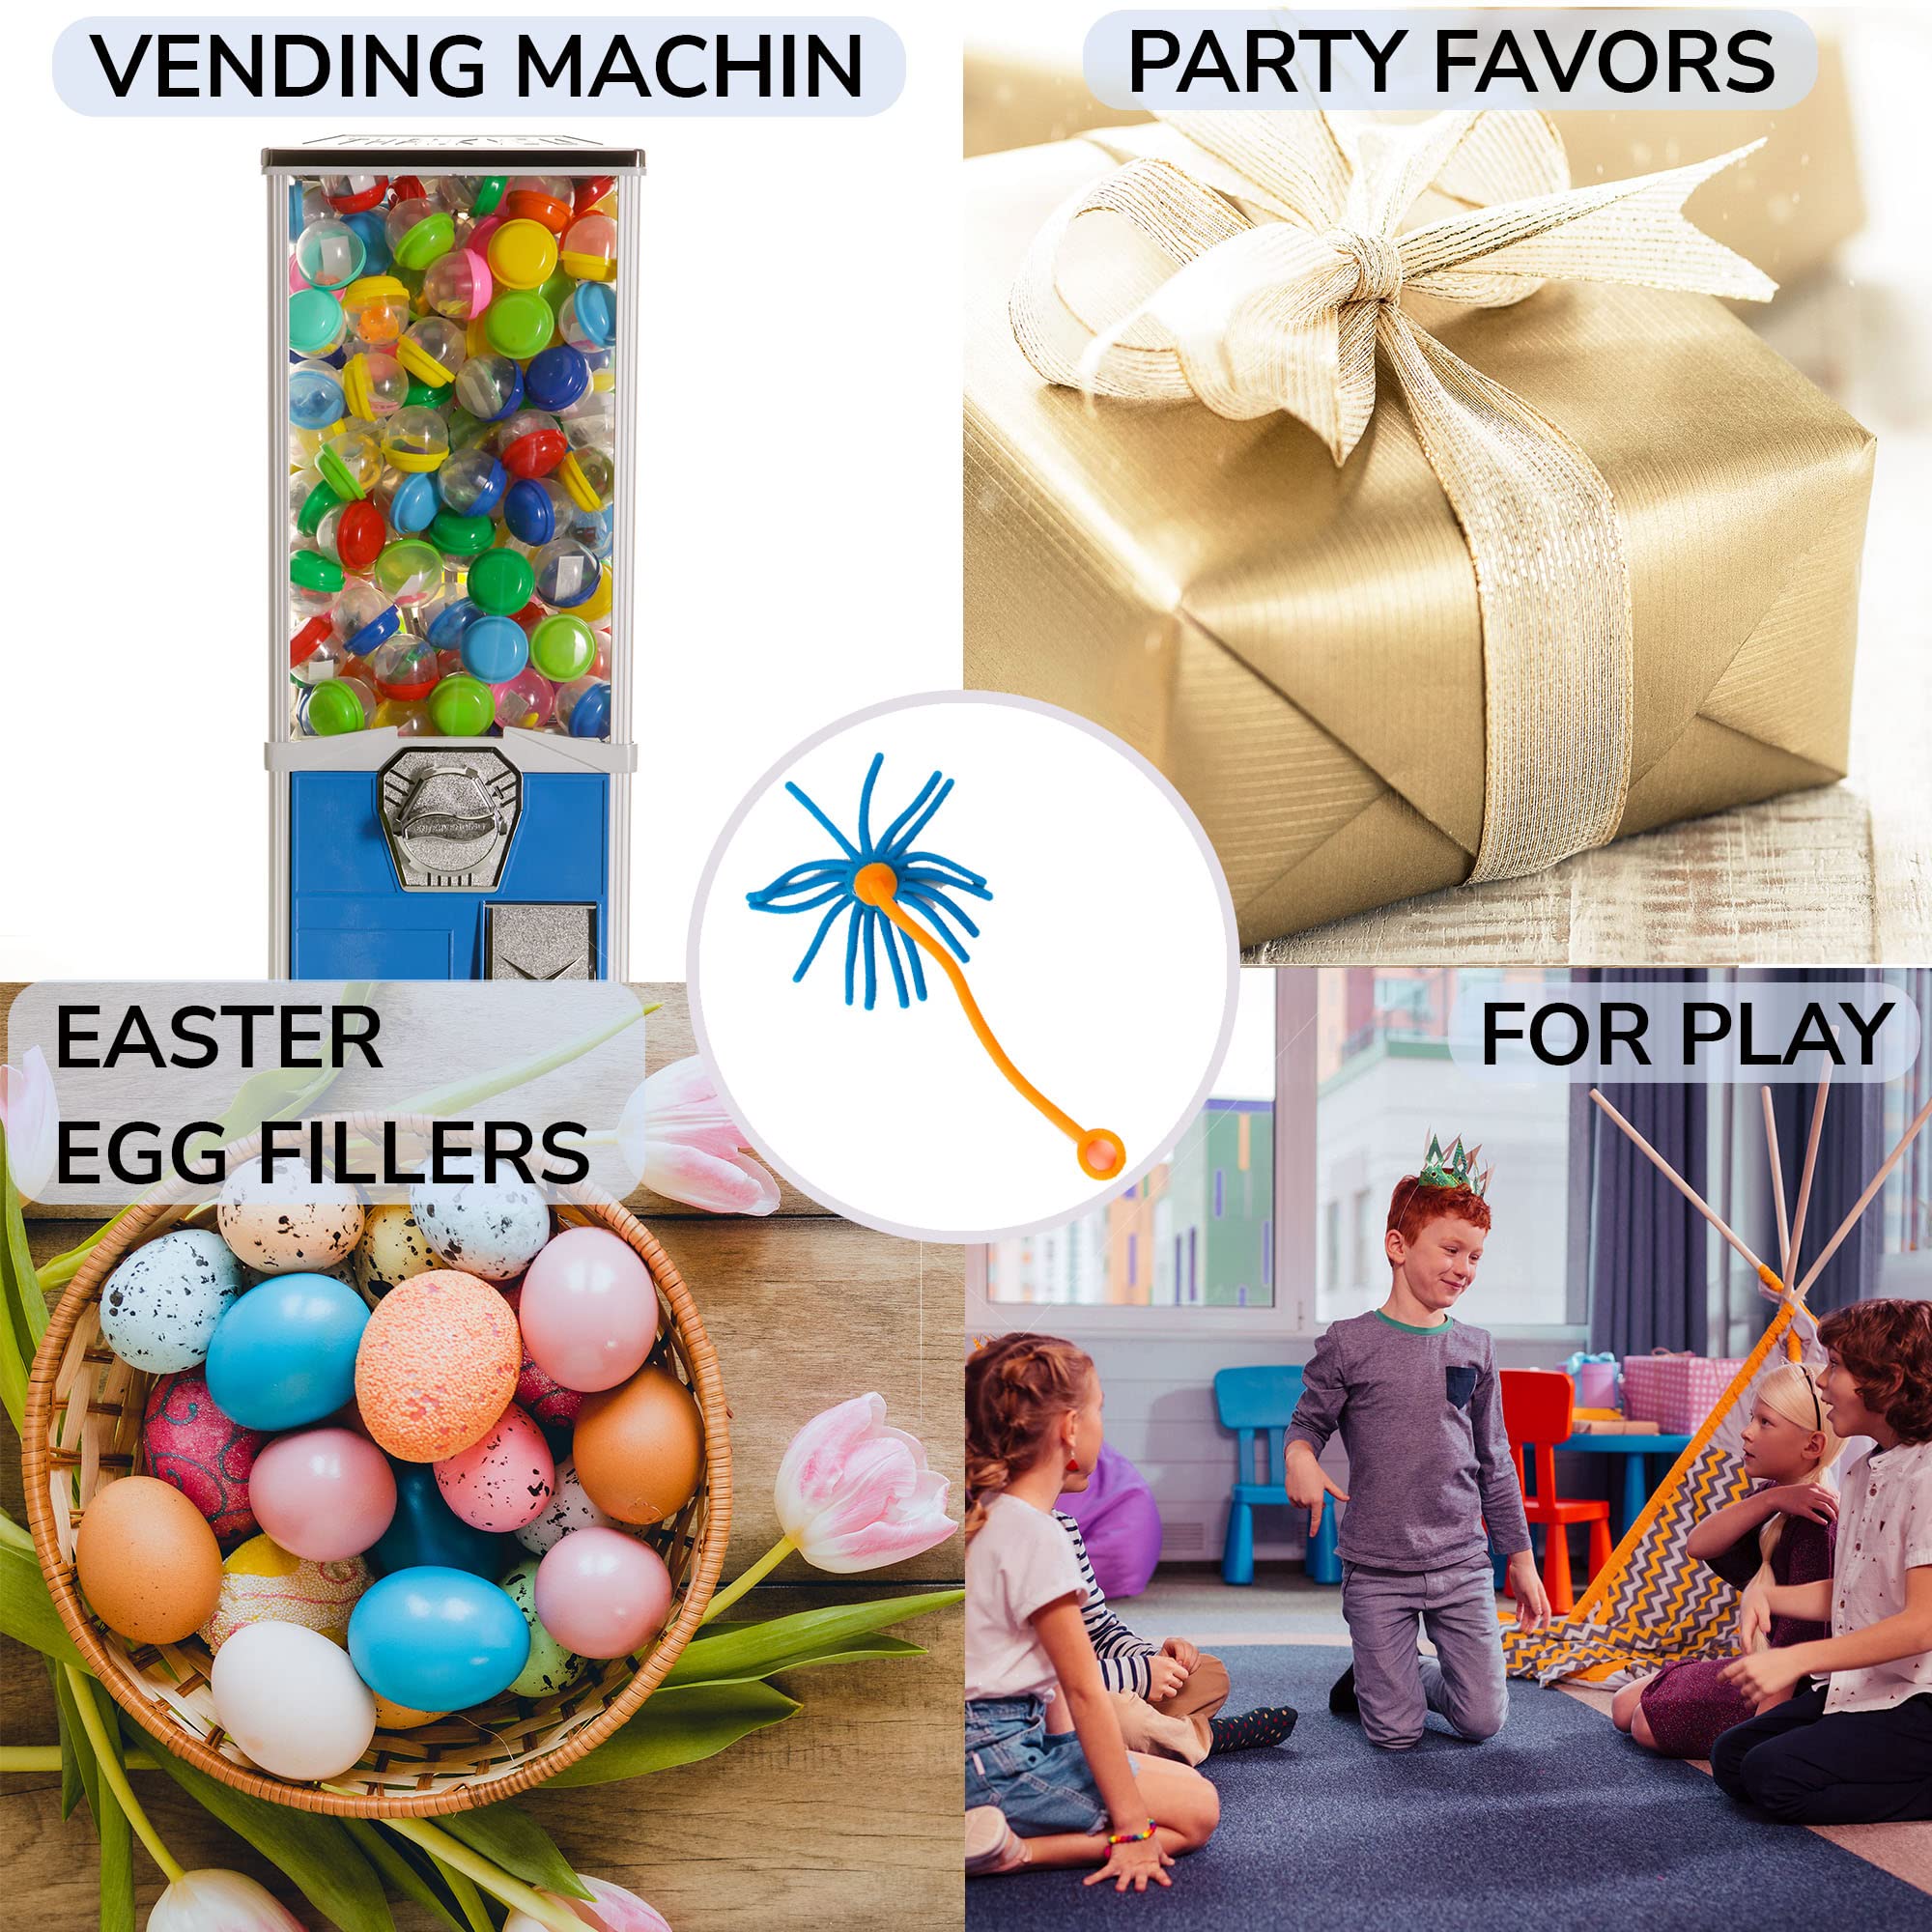 Yoyo Toys for Kids - 100 Pcs Noodle Yo Yo Toy for Party Favors - Easter Egg Fillers - Goodie Bag Supplies and Pinata Stuffers - Prizes for Kids Classroom - Vending Machine Toy